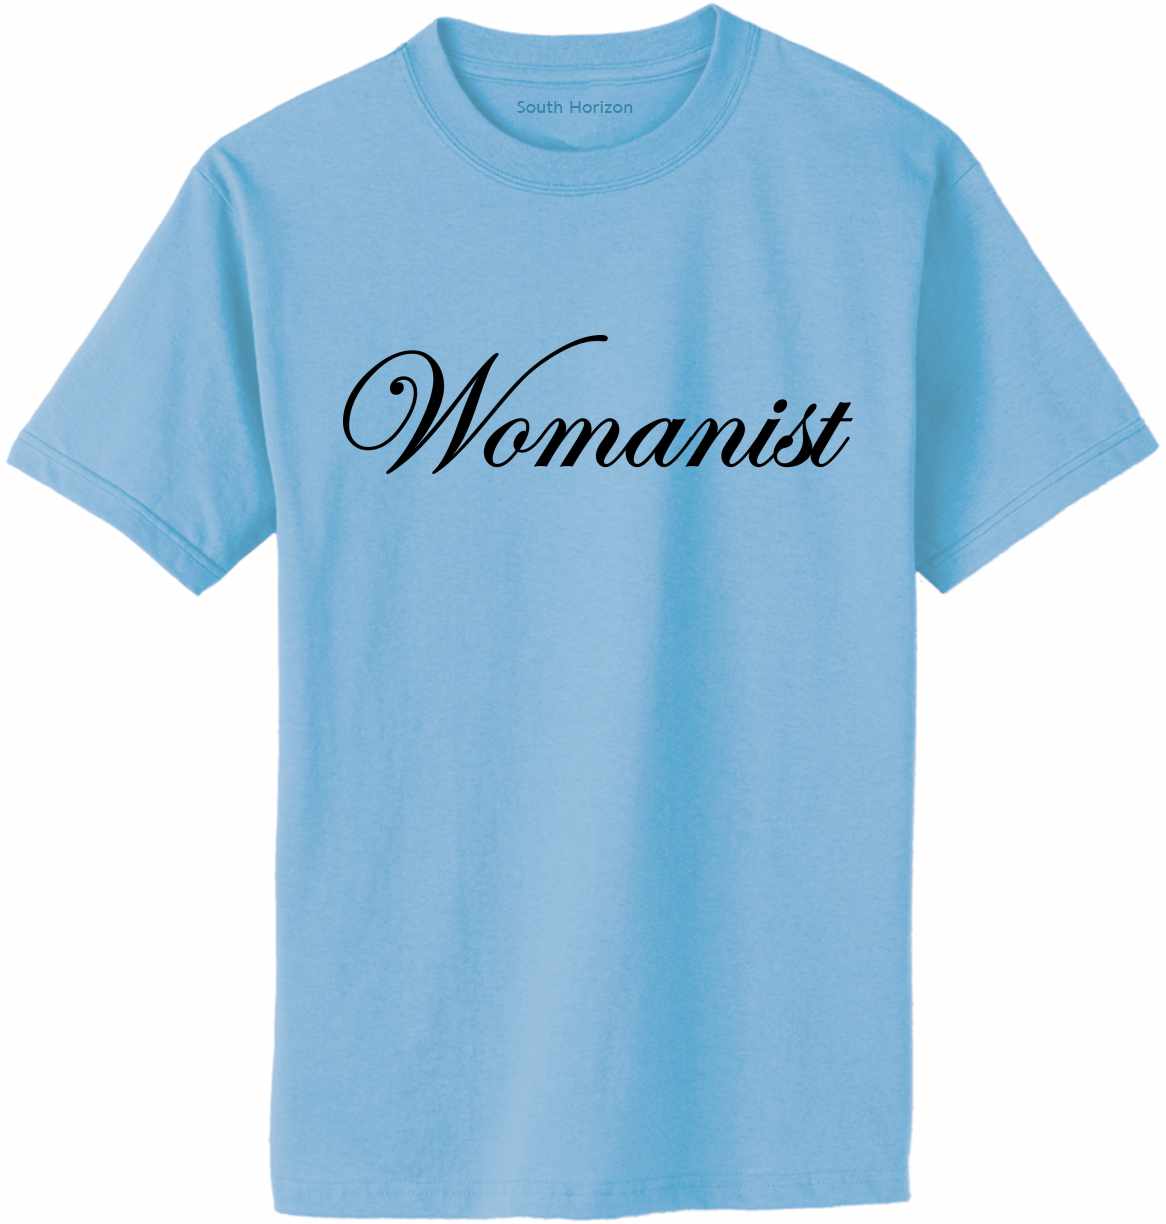 Womanist on Adult T-Shirt (#1222-1)